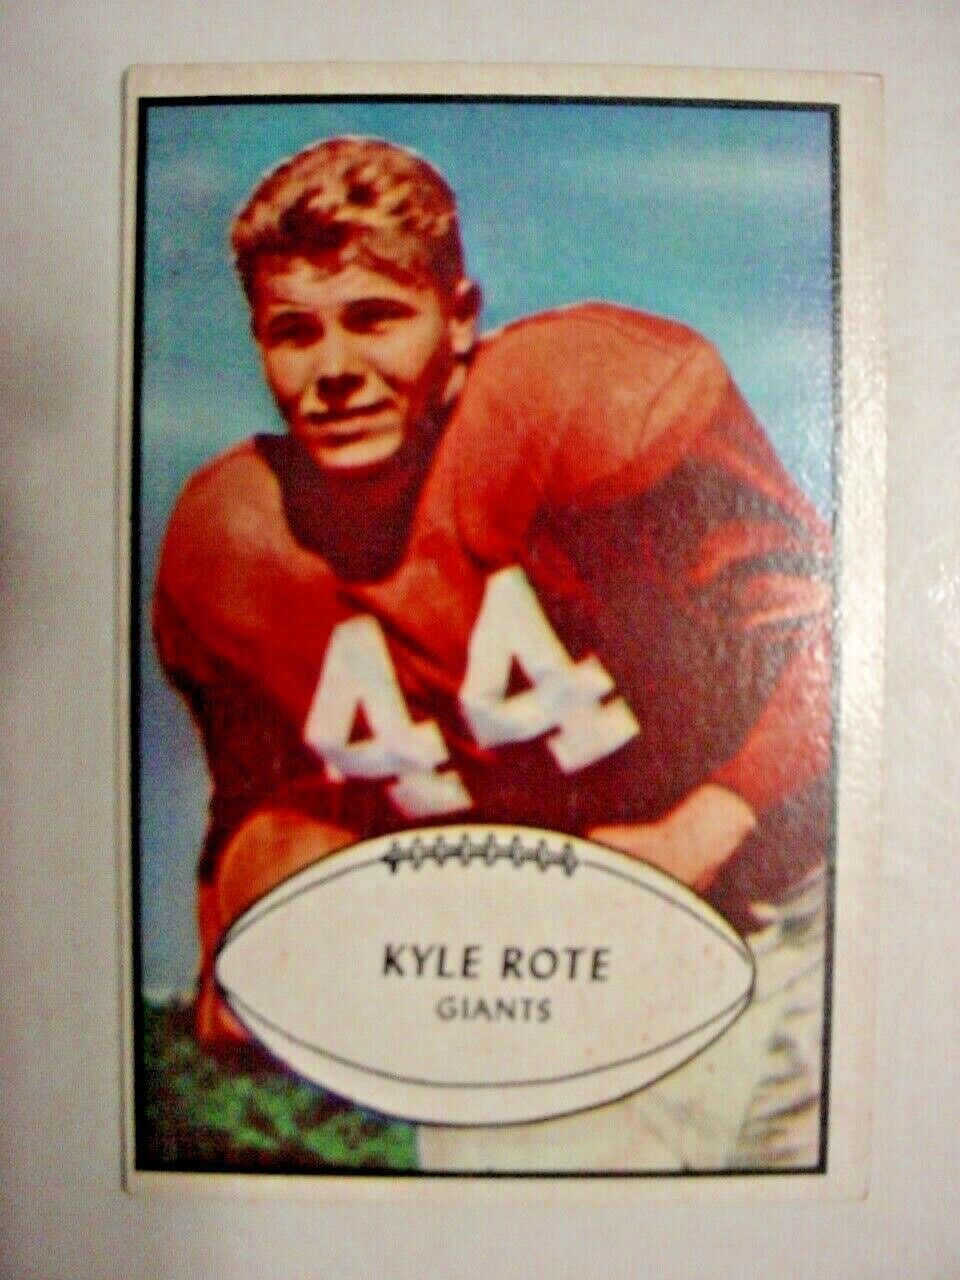 1953 Bowman #25 Kyle Rote-vg+/ex-New York Giants - $25.00